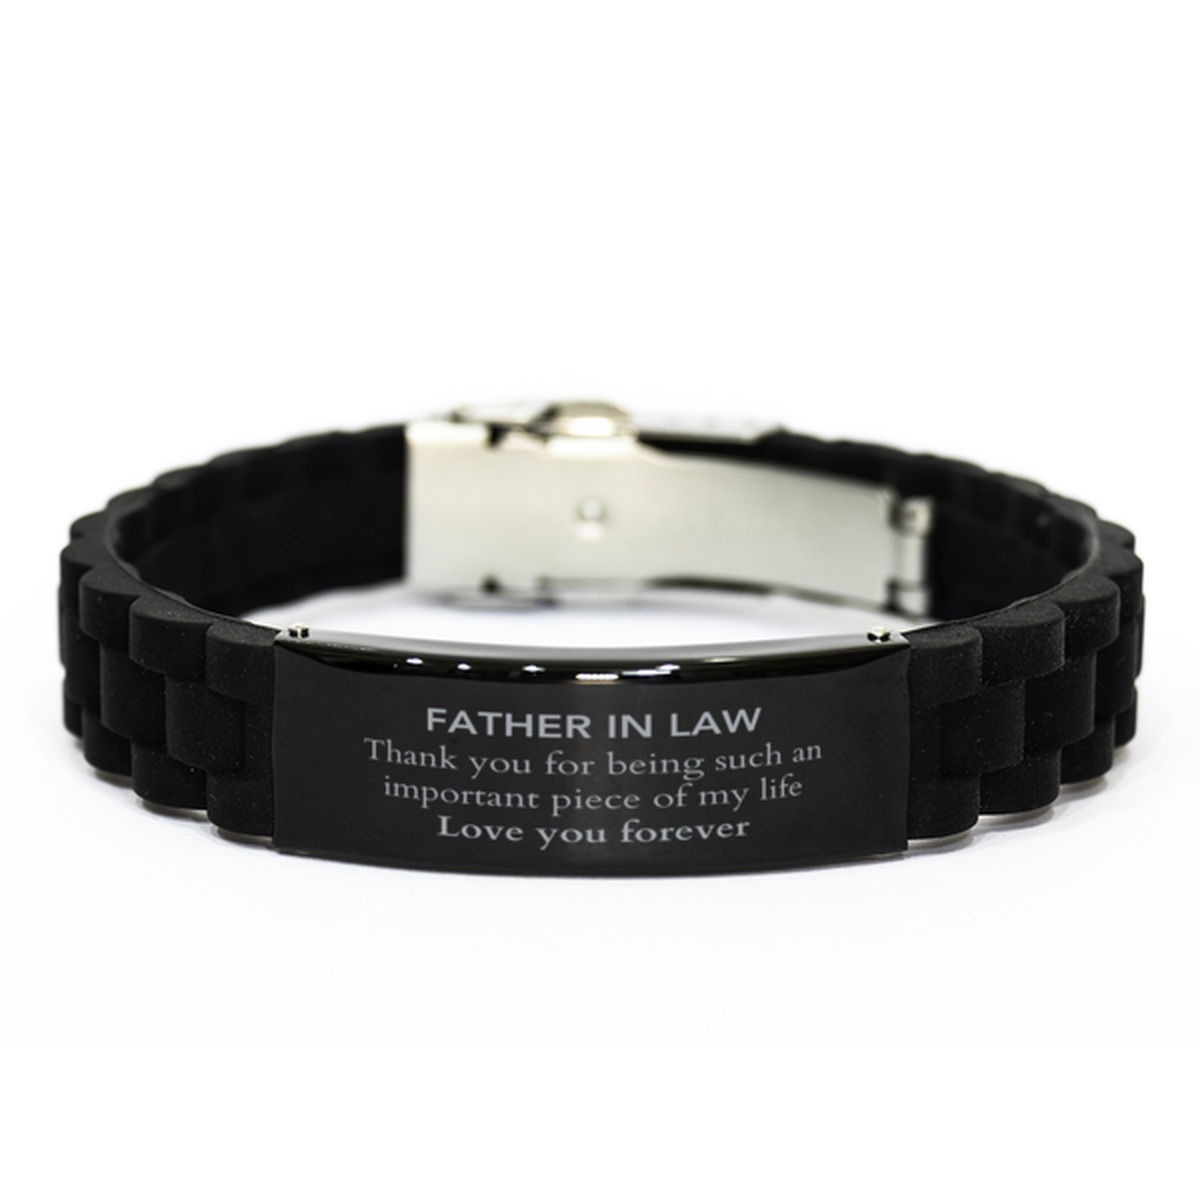 Appropriate Father In Law Black Glidelock Clasp Bracelet Epic Birthday Gifts for Father In Law Thank you for being such an important piece of my life Father In Law Christmas Mothers Fathers Day